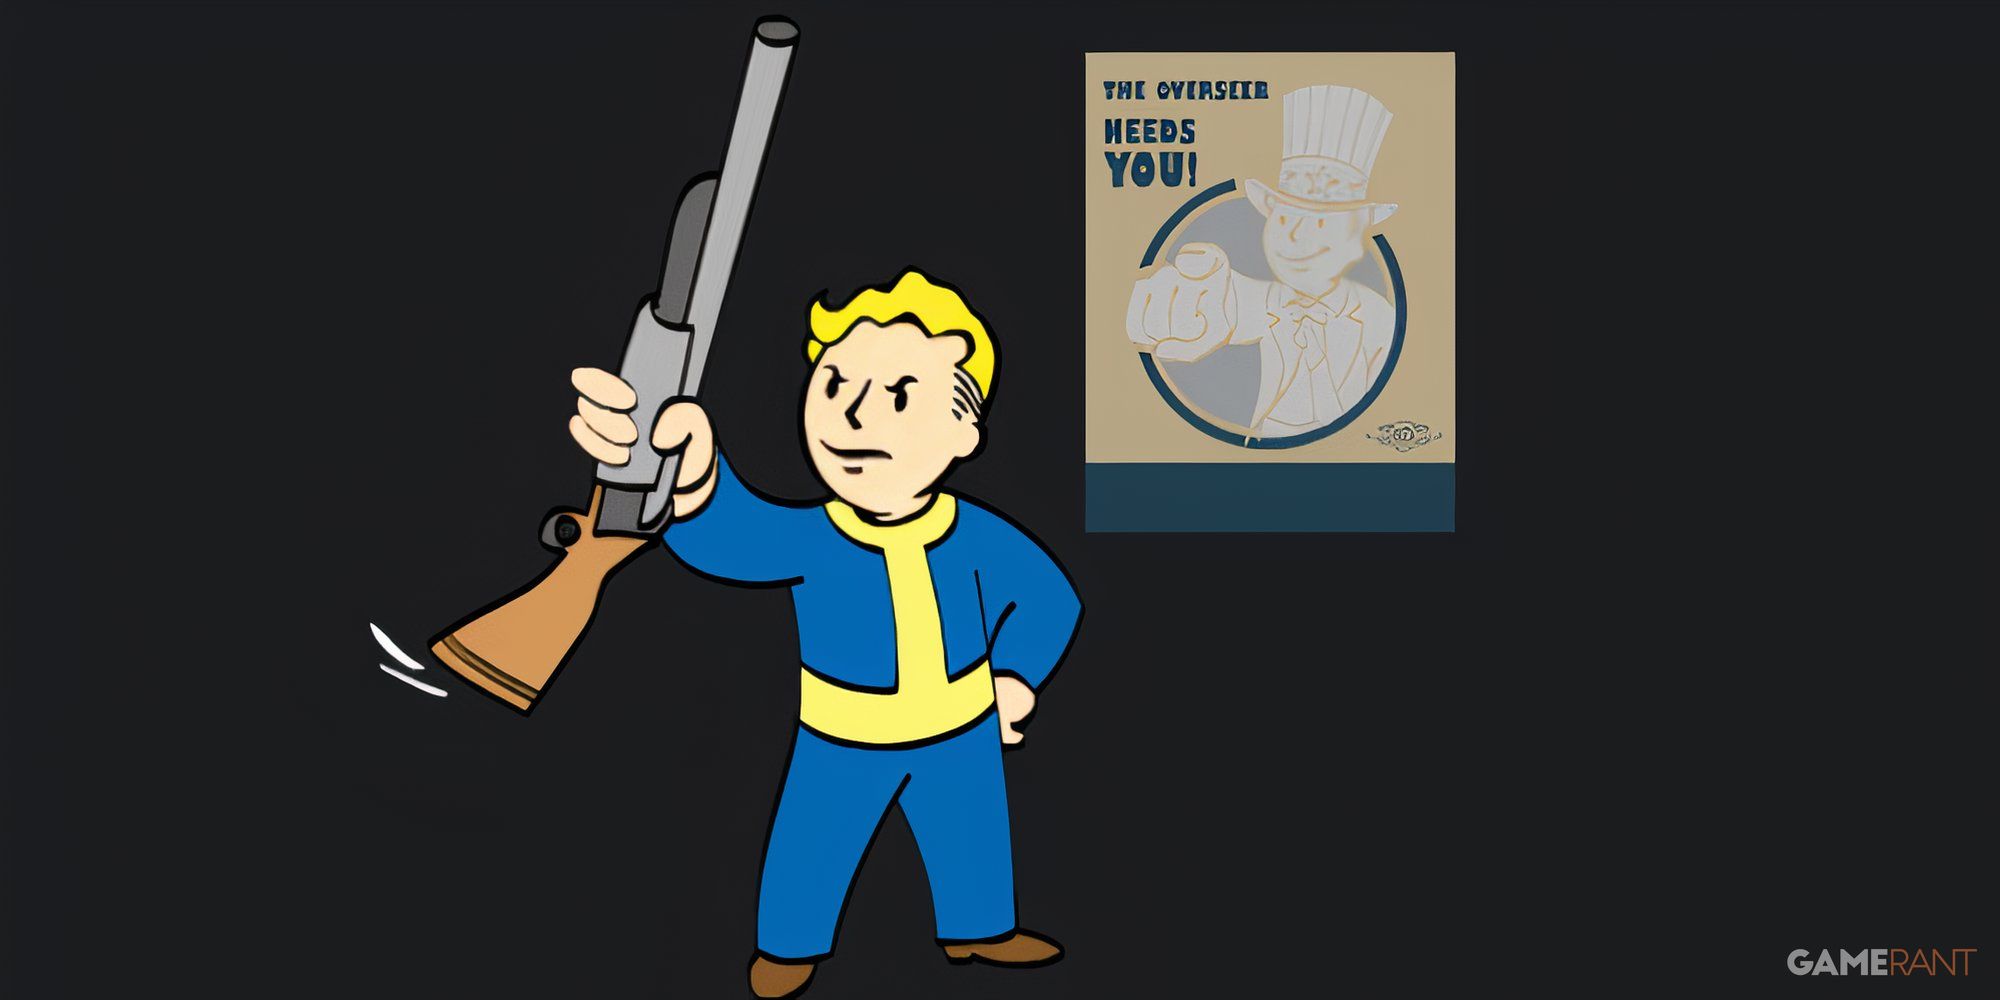 Vault Boy holds a gun with the barrel facing up. A poster in the background says 'Your Overseer Needs You!"